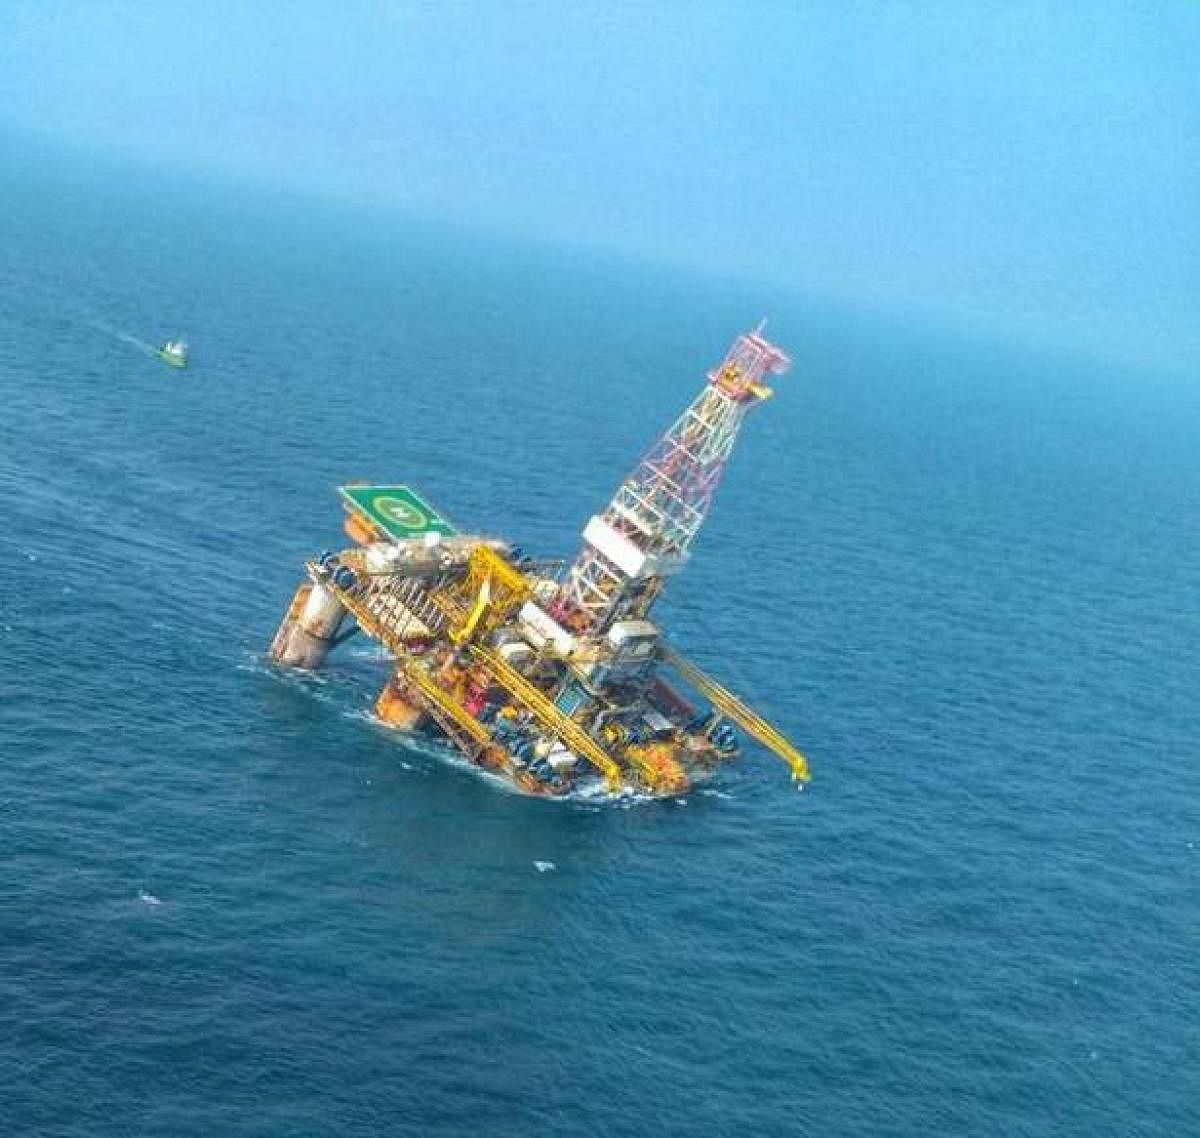 The tilted deck of the ONGC oil rig in the Bay of Bengal off Andhra Pradesh coast. Photo: Twitter/@indiannavy